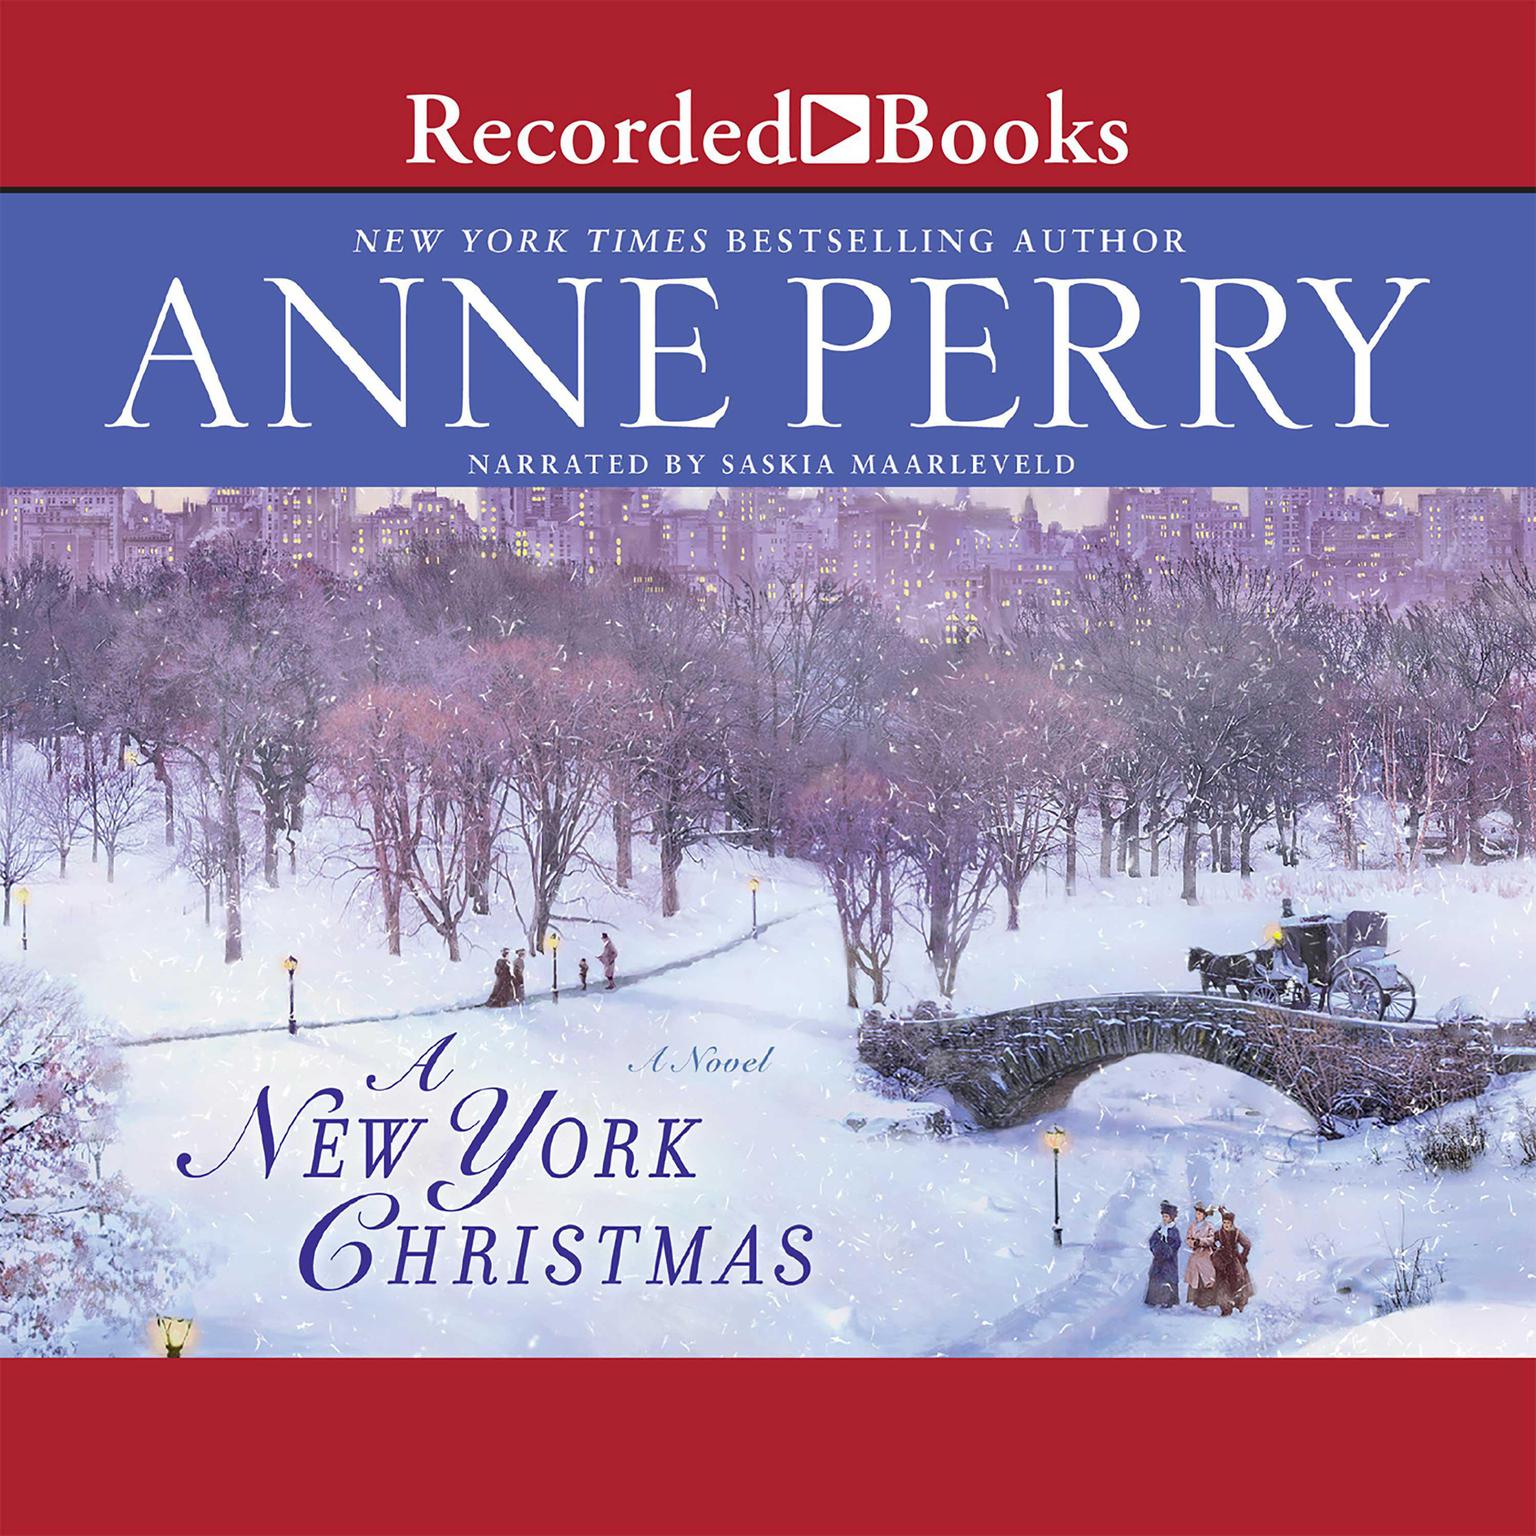 A New York Christmas Audiobook, by Anne Perry